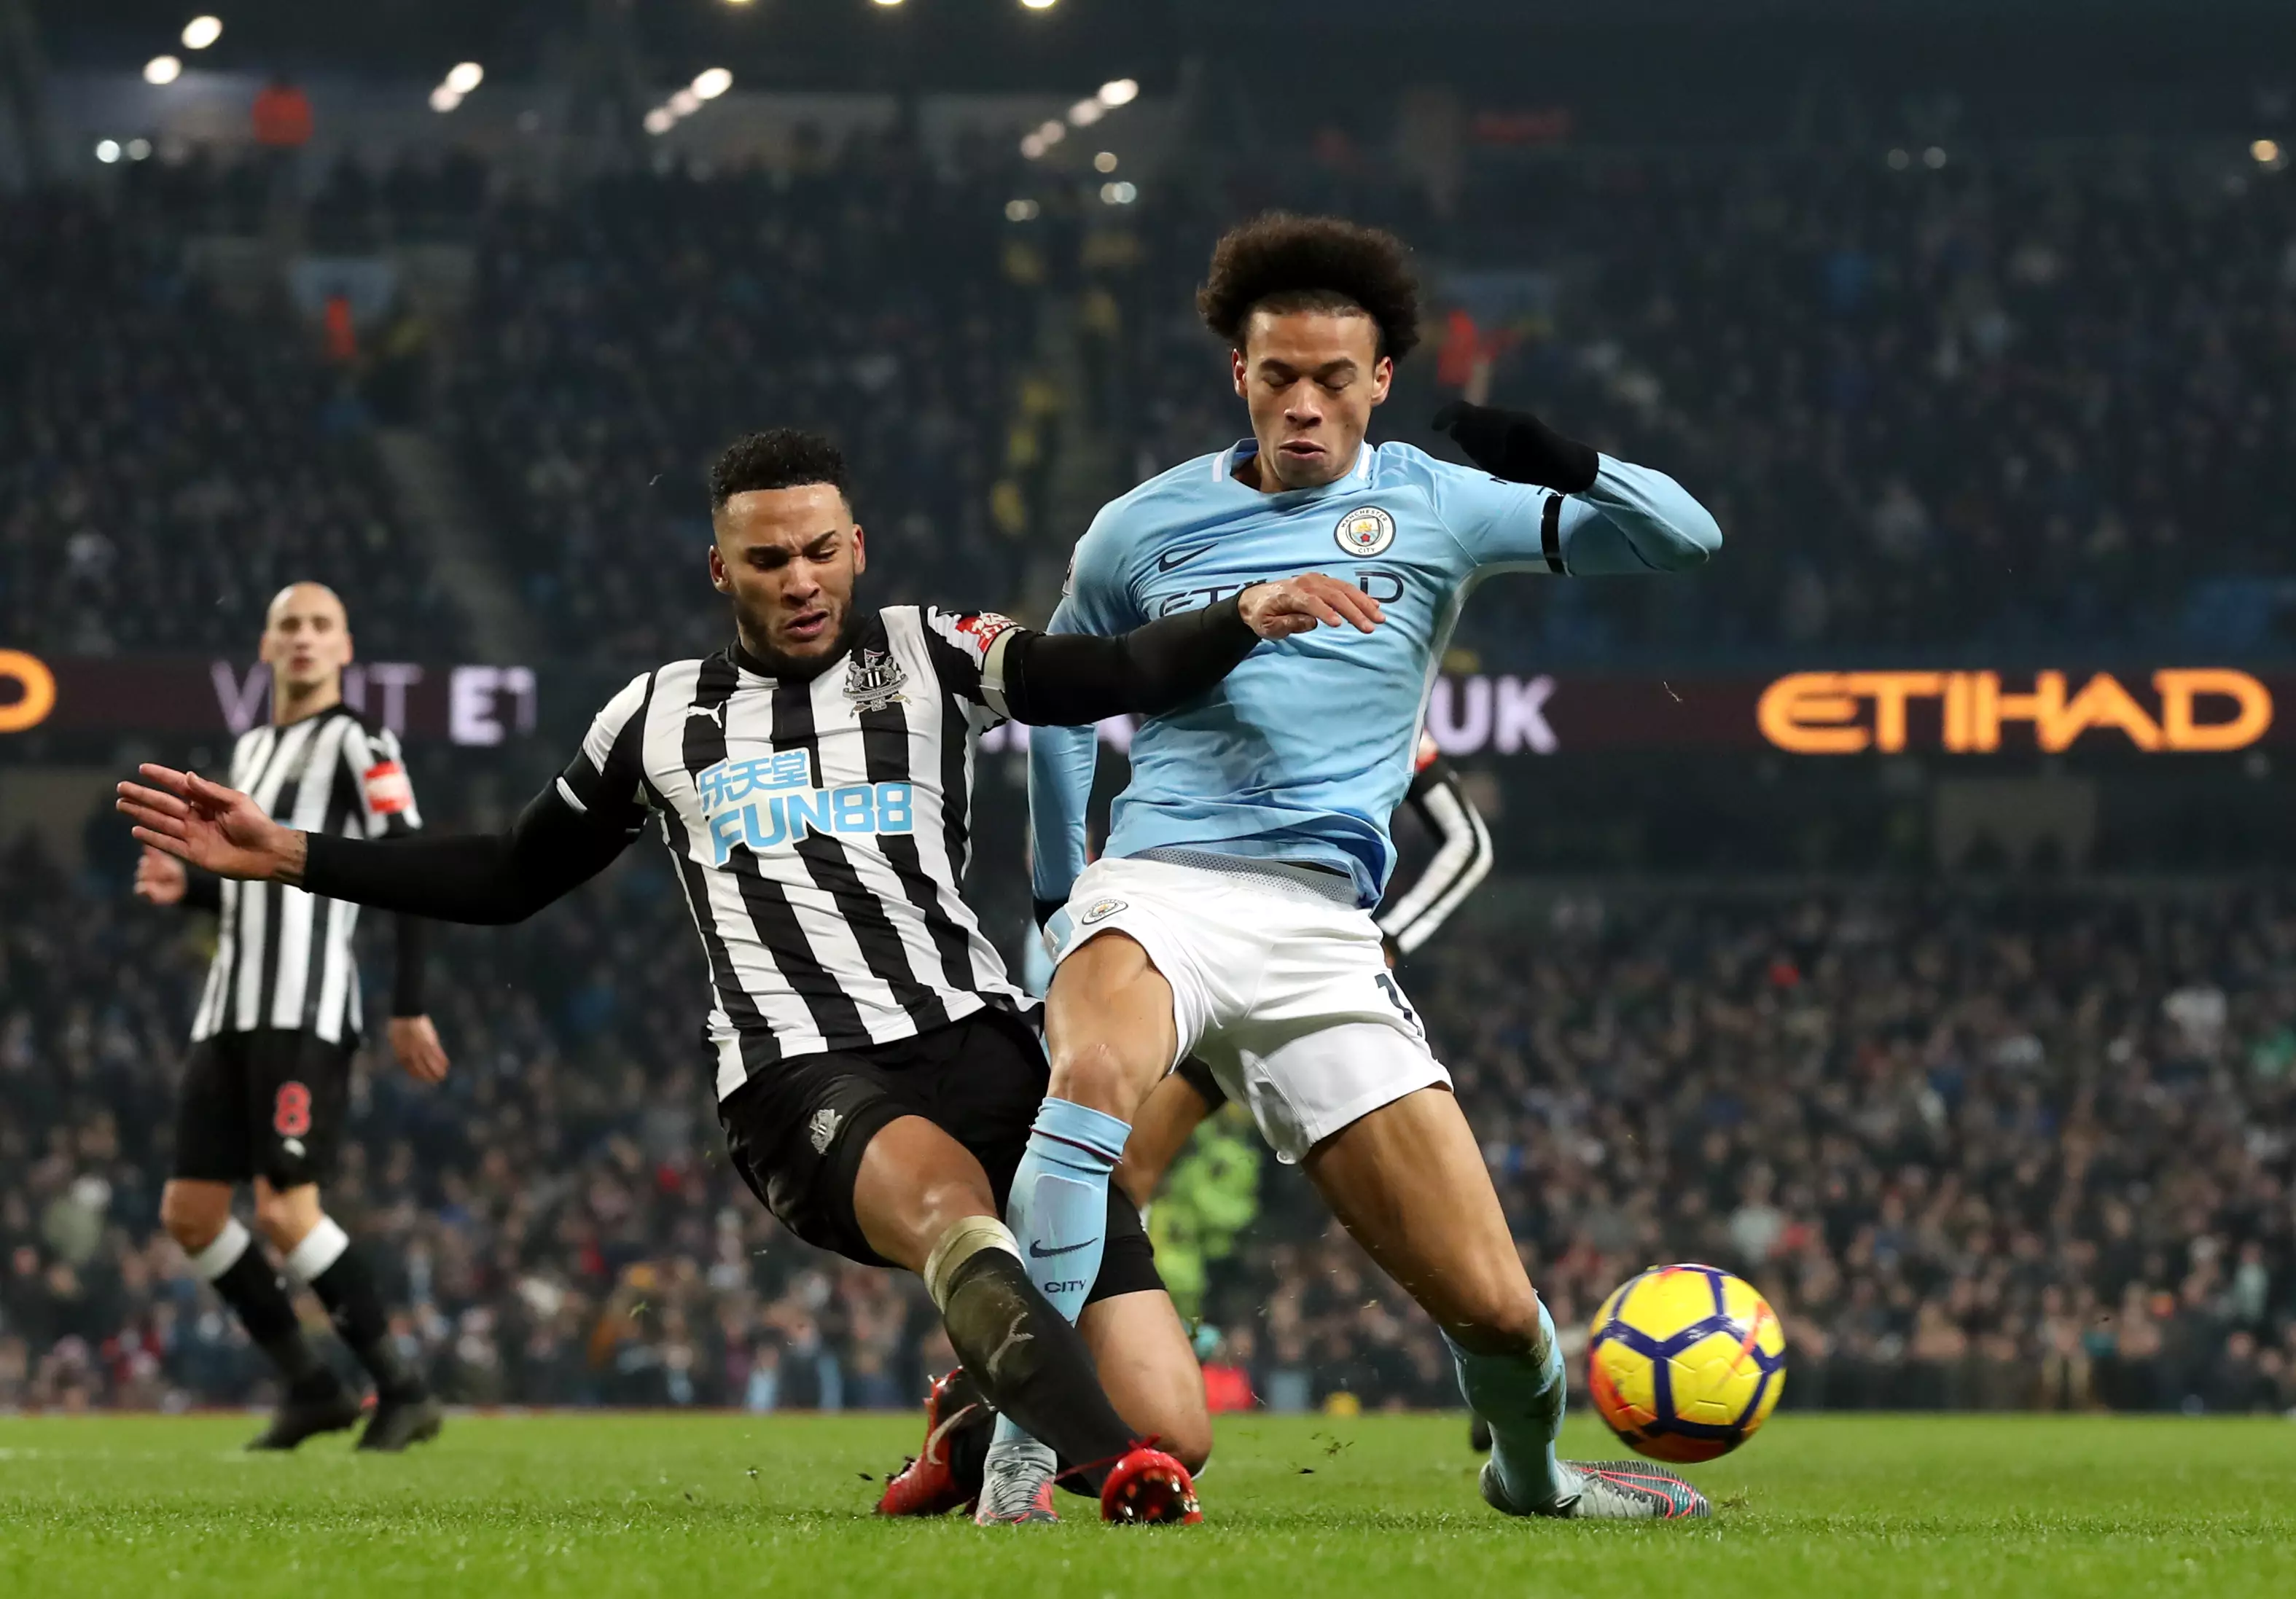 Lascelles in action for Newcastle. Image: PA